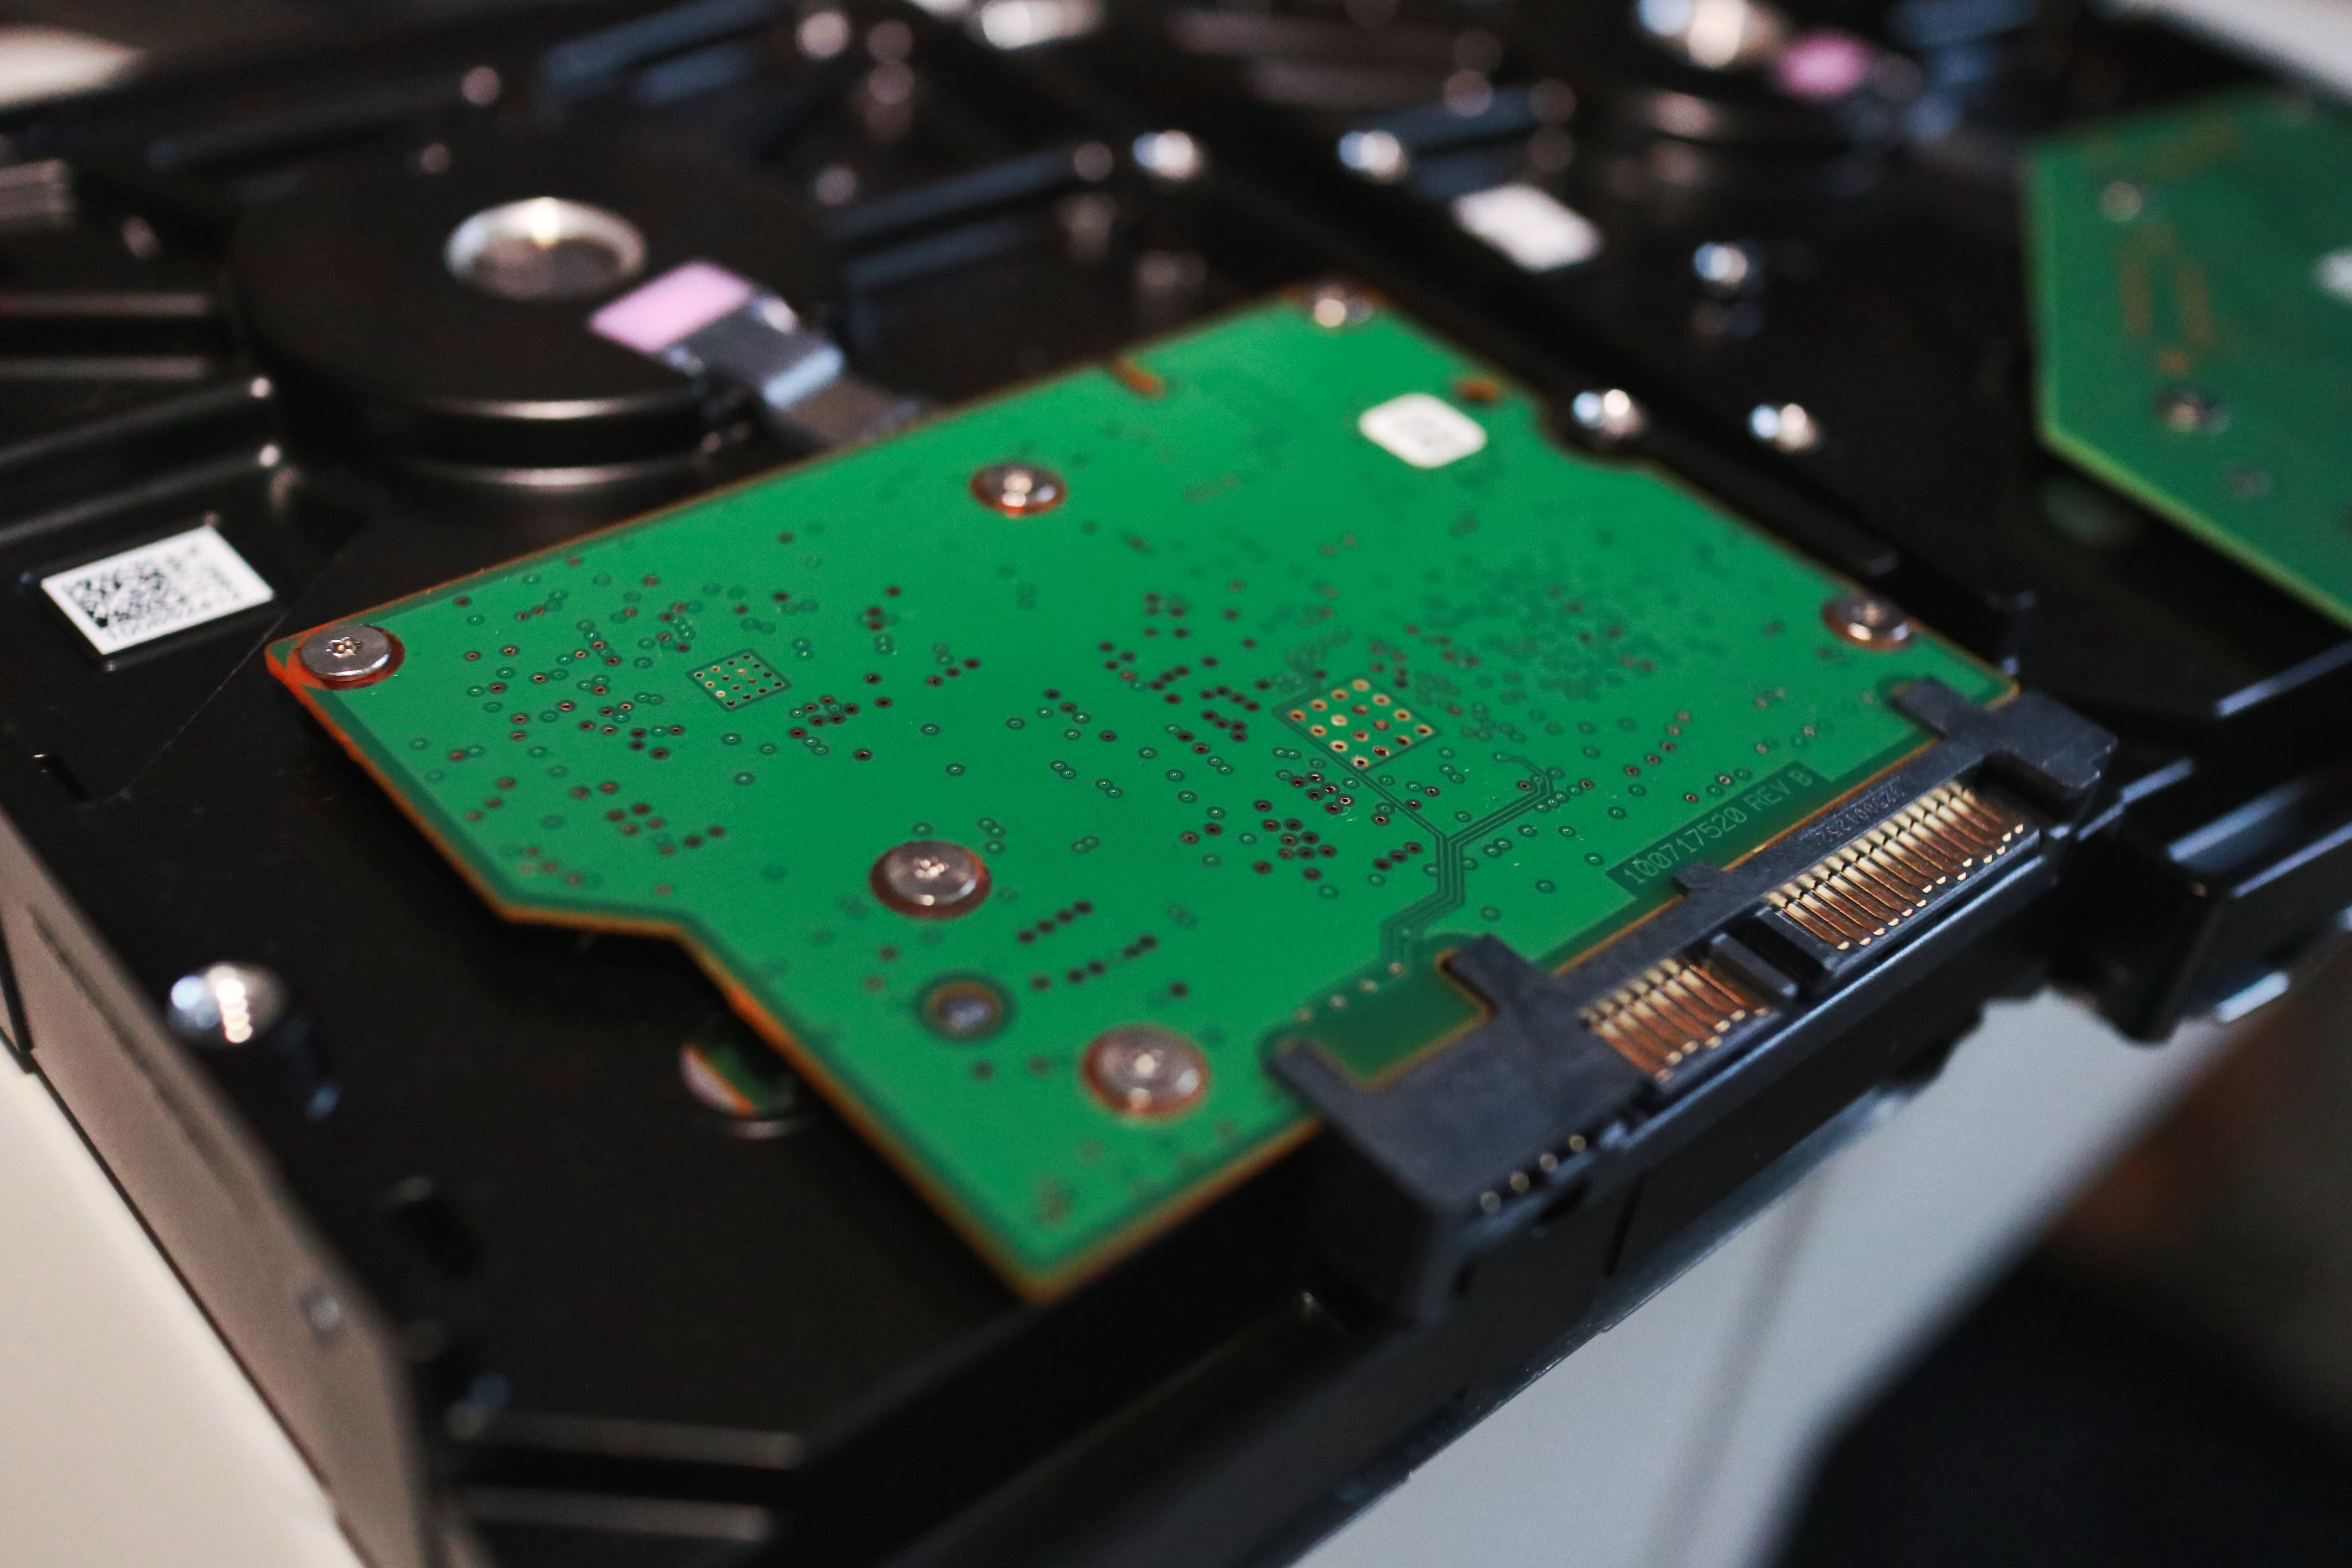 solid state hybrid drive (SSHD) data recovery